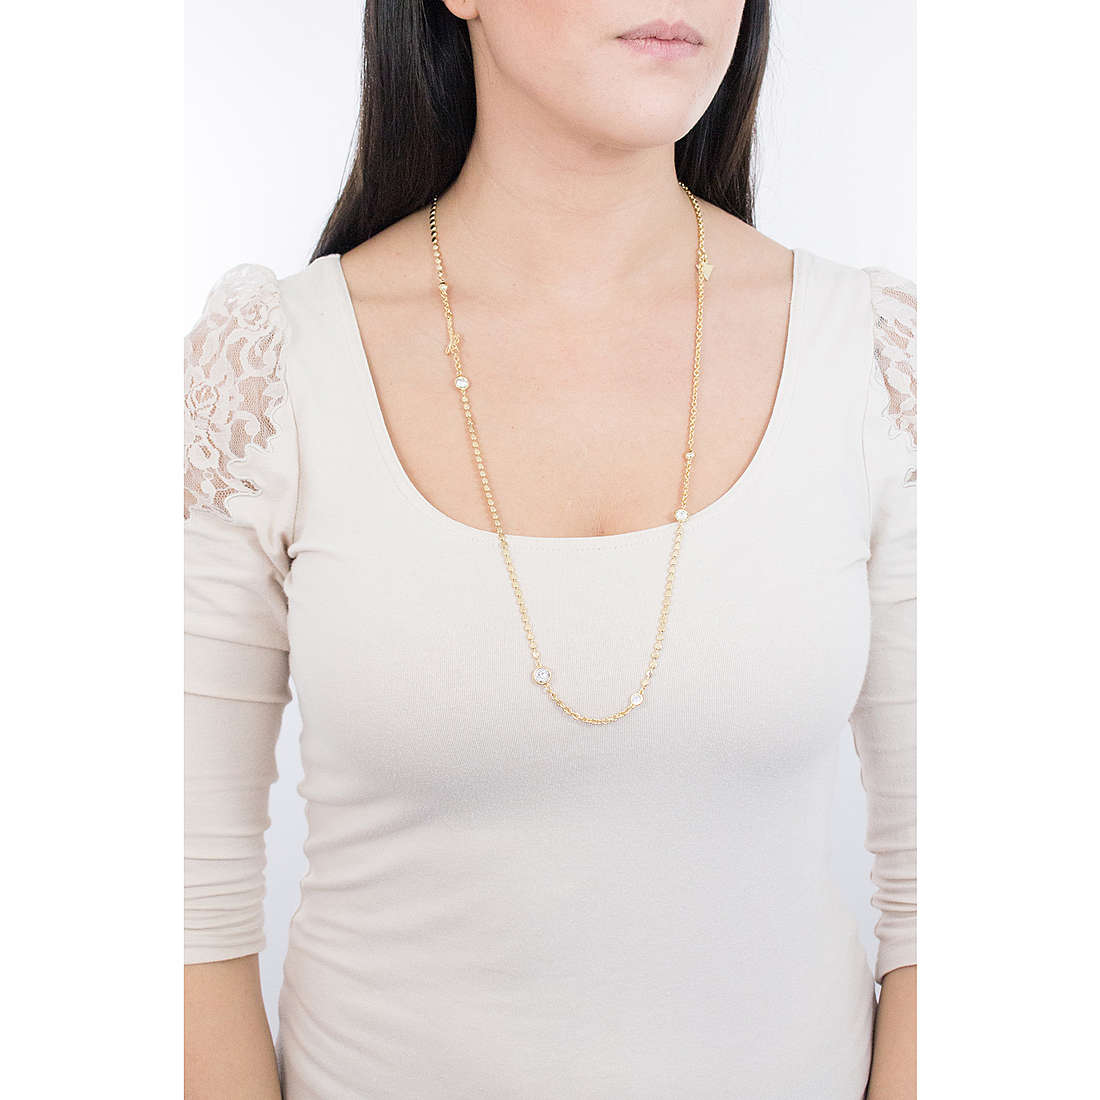 Guess necklaces Crystal Beauty woman UBN84078 wearing